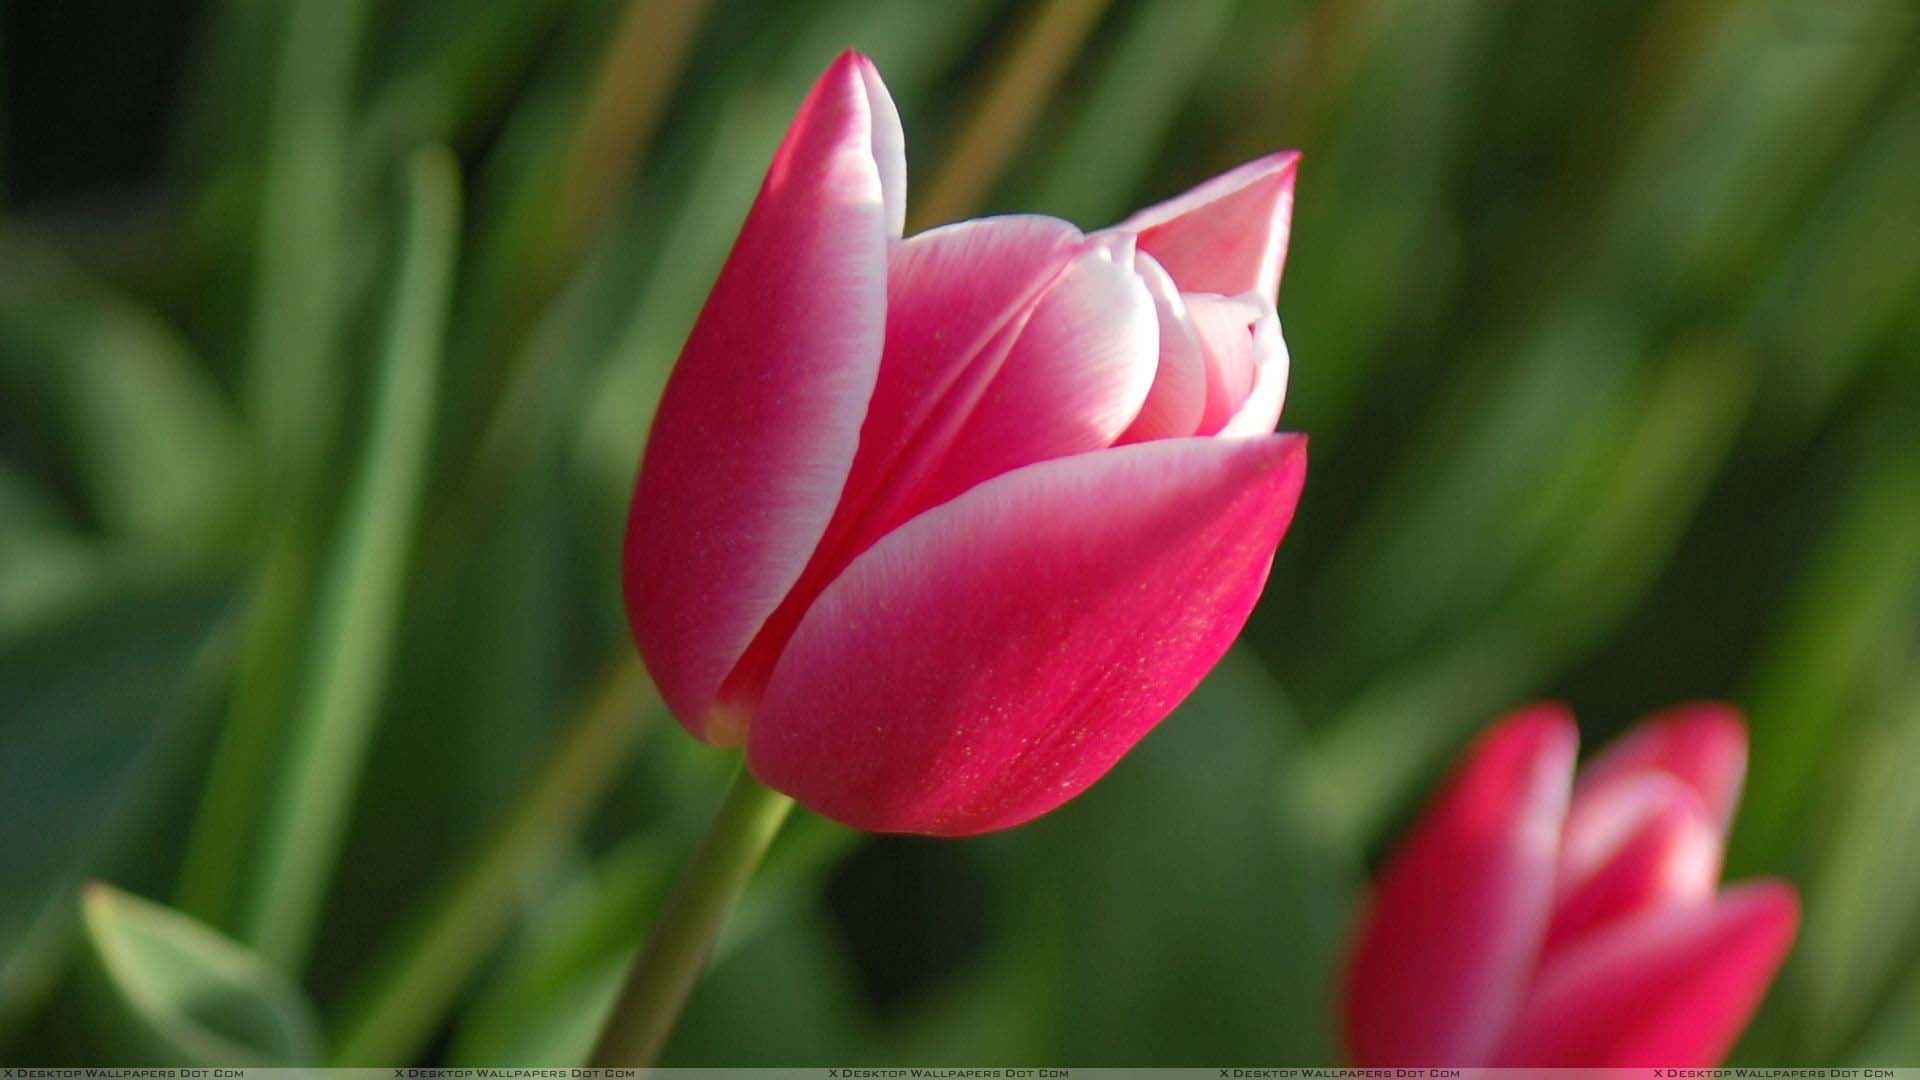 pink tulips closeup holland flowers beautiful images free